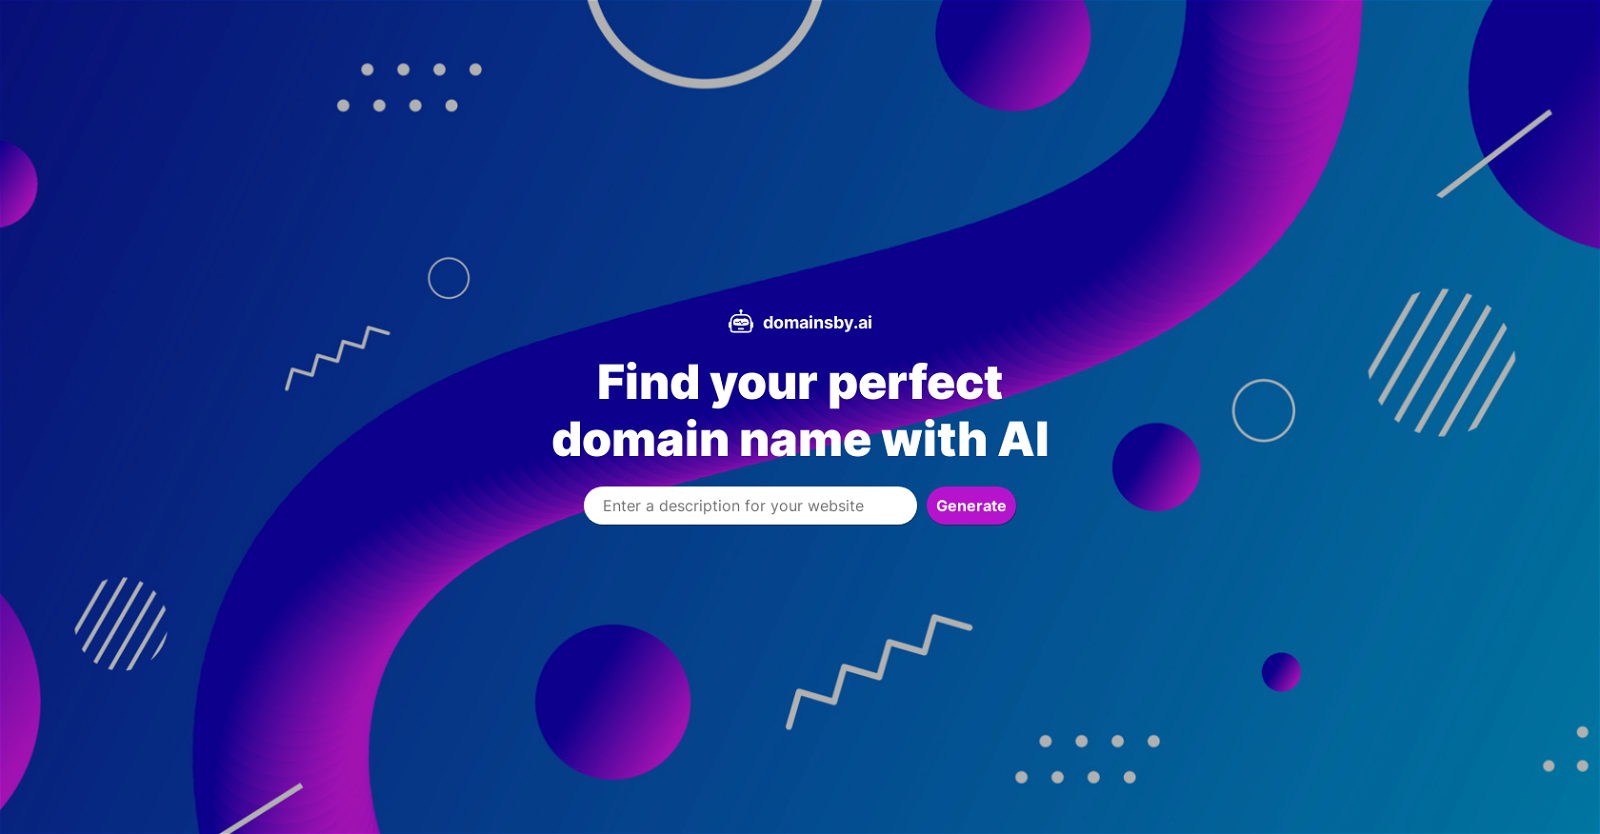 Domains by AI website